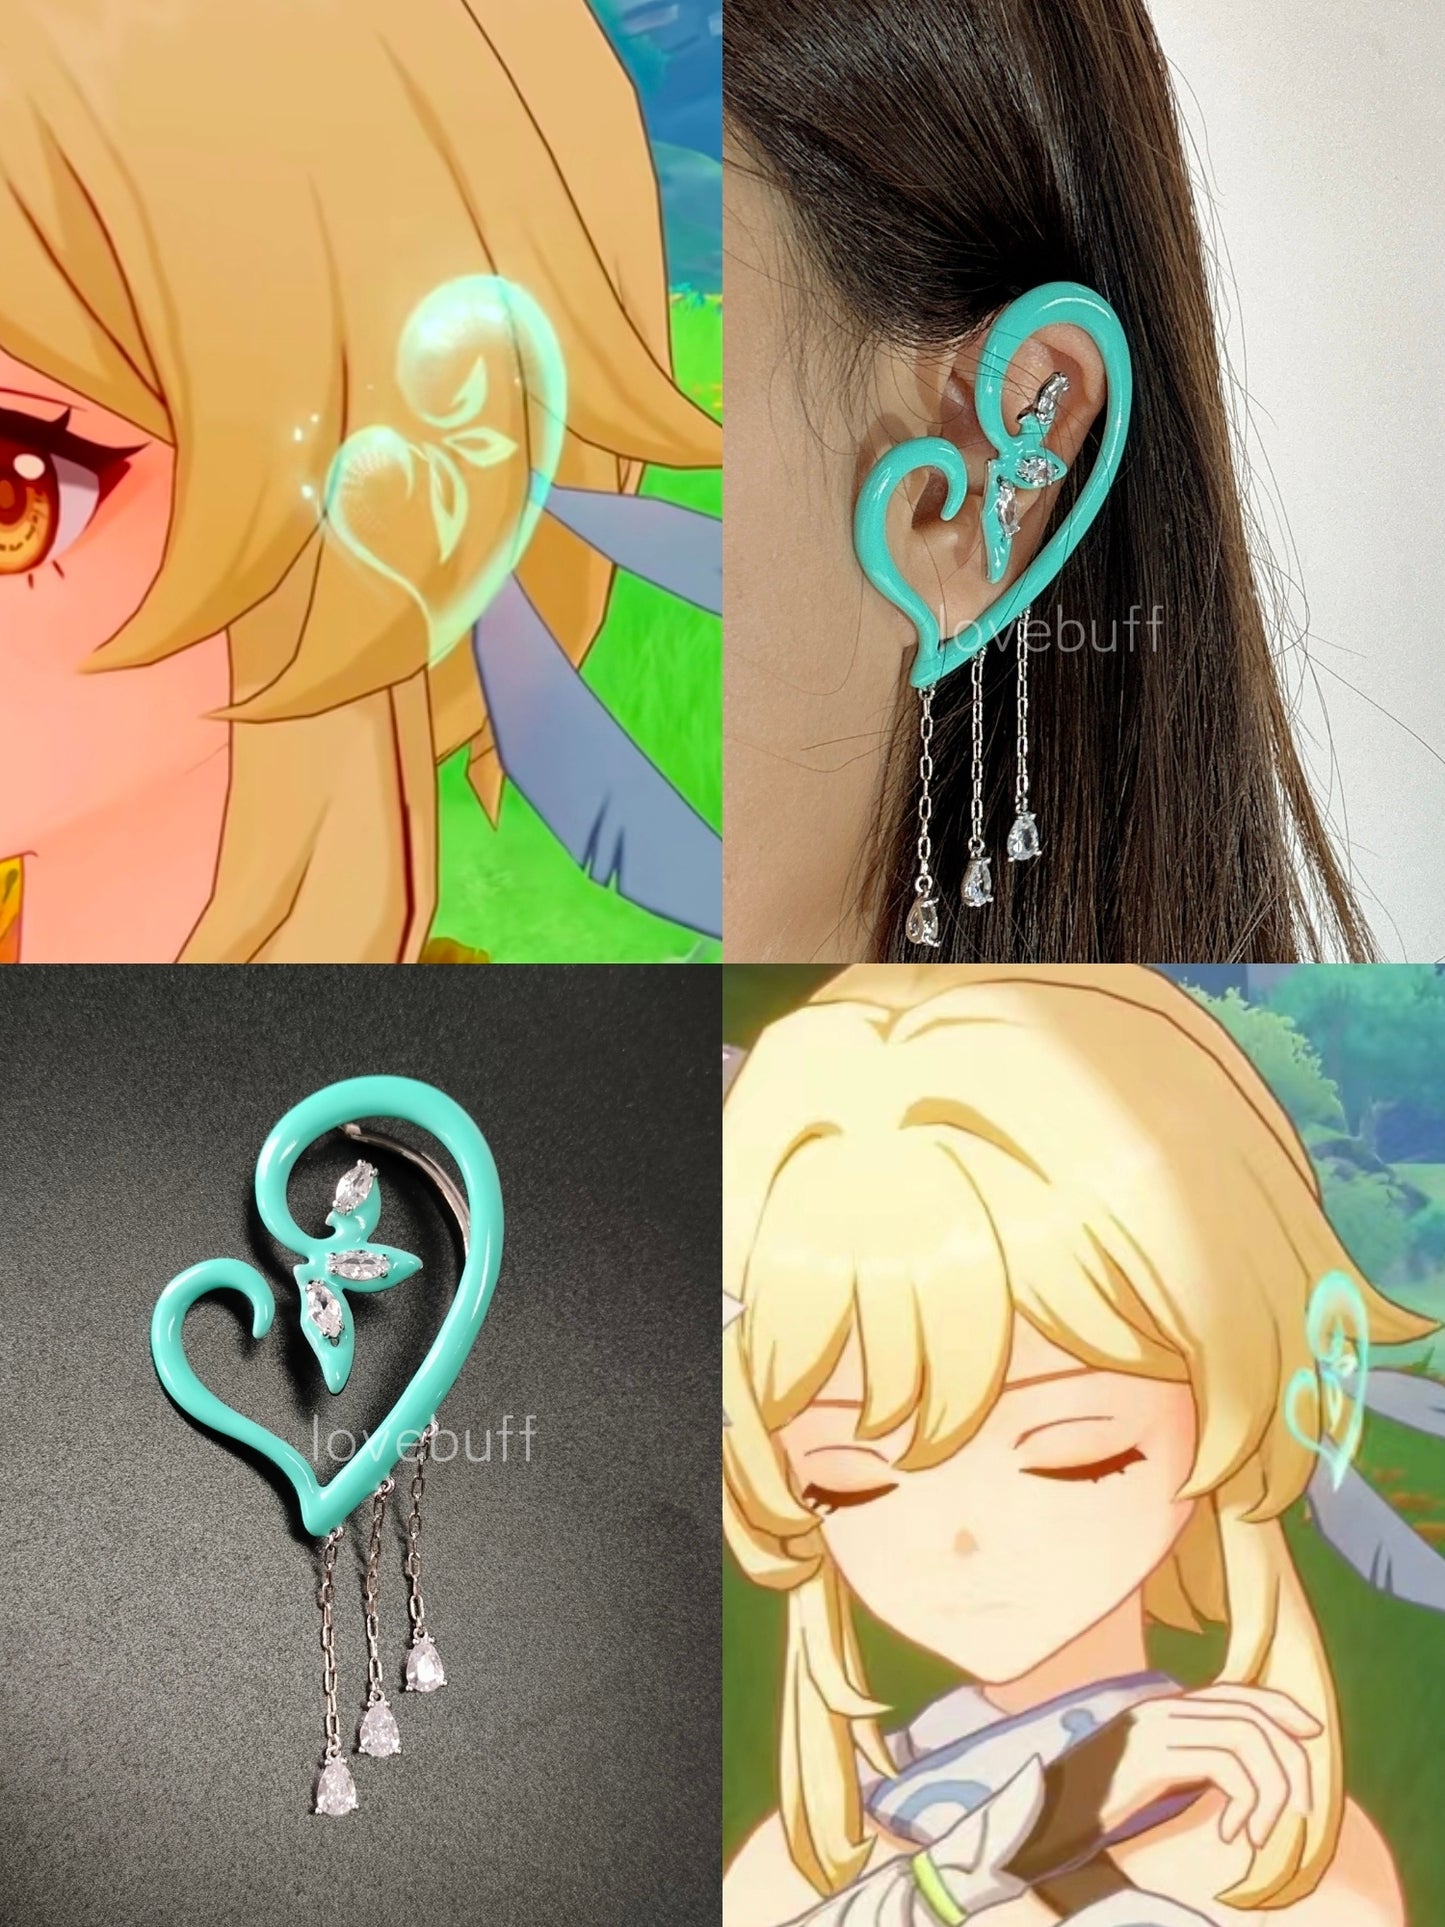 LOVEBUFF Genshin Impact Sumeru Akasha Terminal Style Glow In The Dark Adjustable Wrap Cuff Earring for Daily Use & Cosplay, Gift For Her & Game Lovers